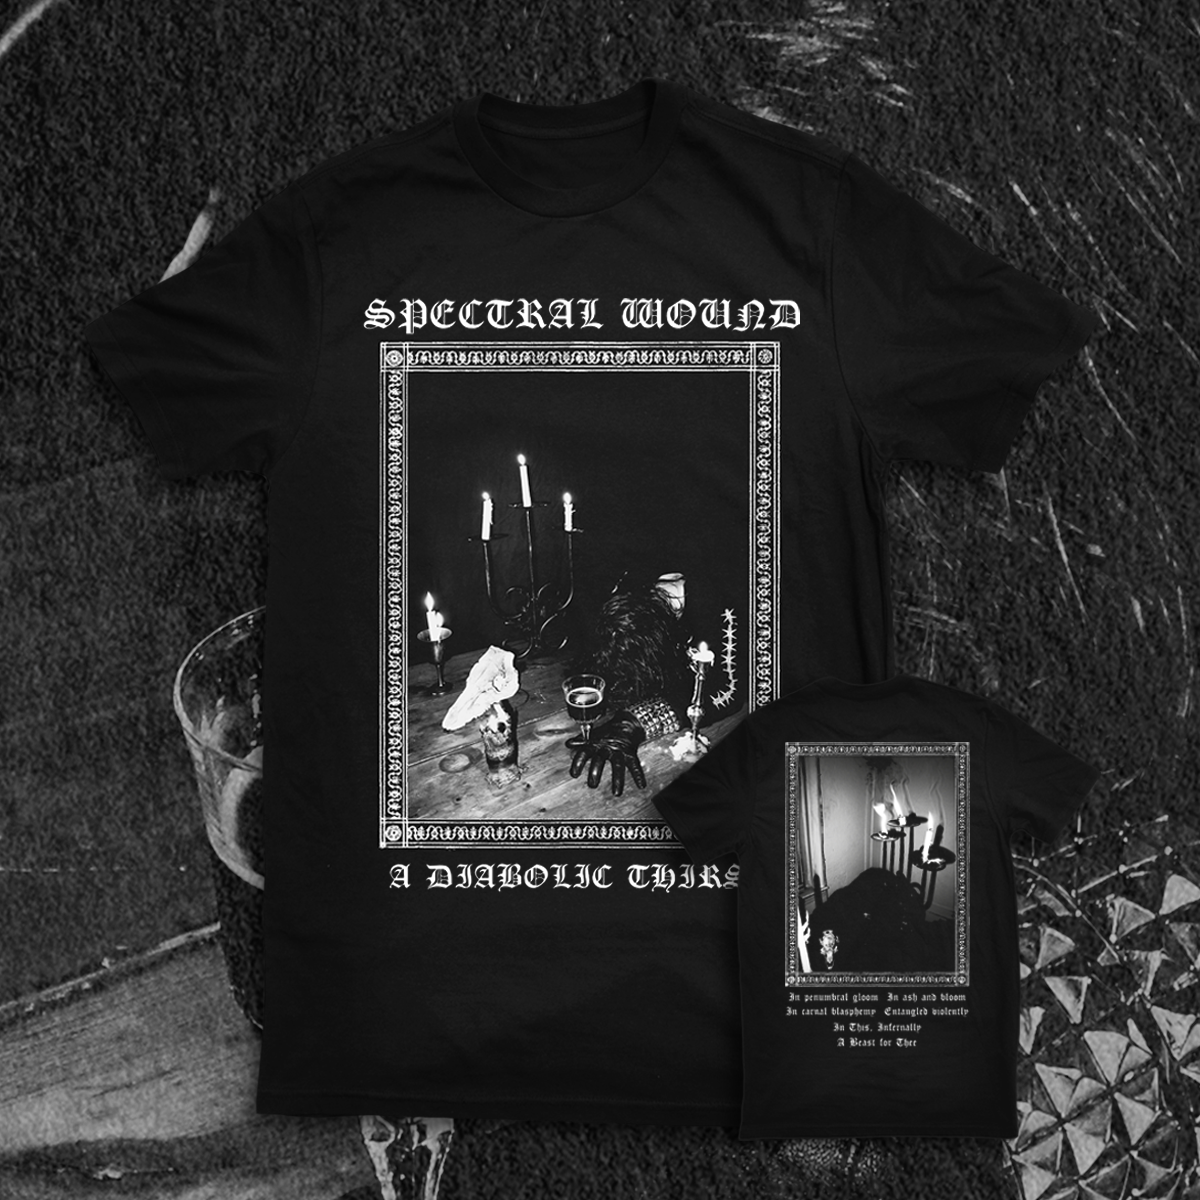 SPECTRAL WOUND "A DIABOLIC THIRST" SHIRT (PRE-ORDER)